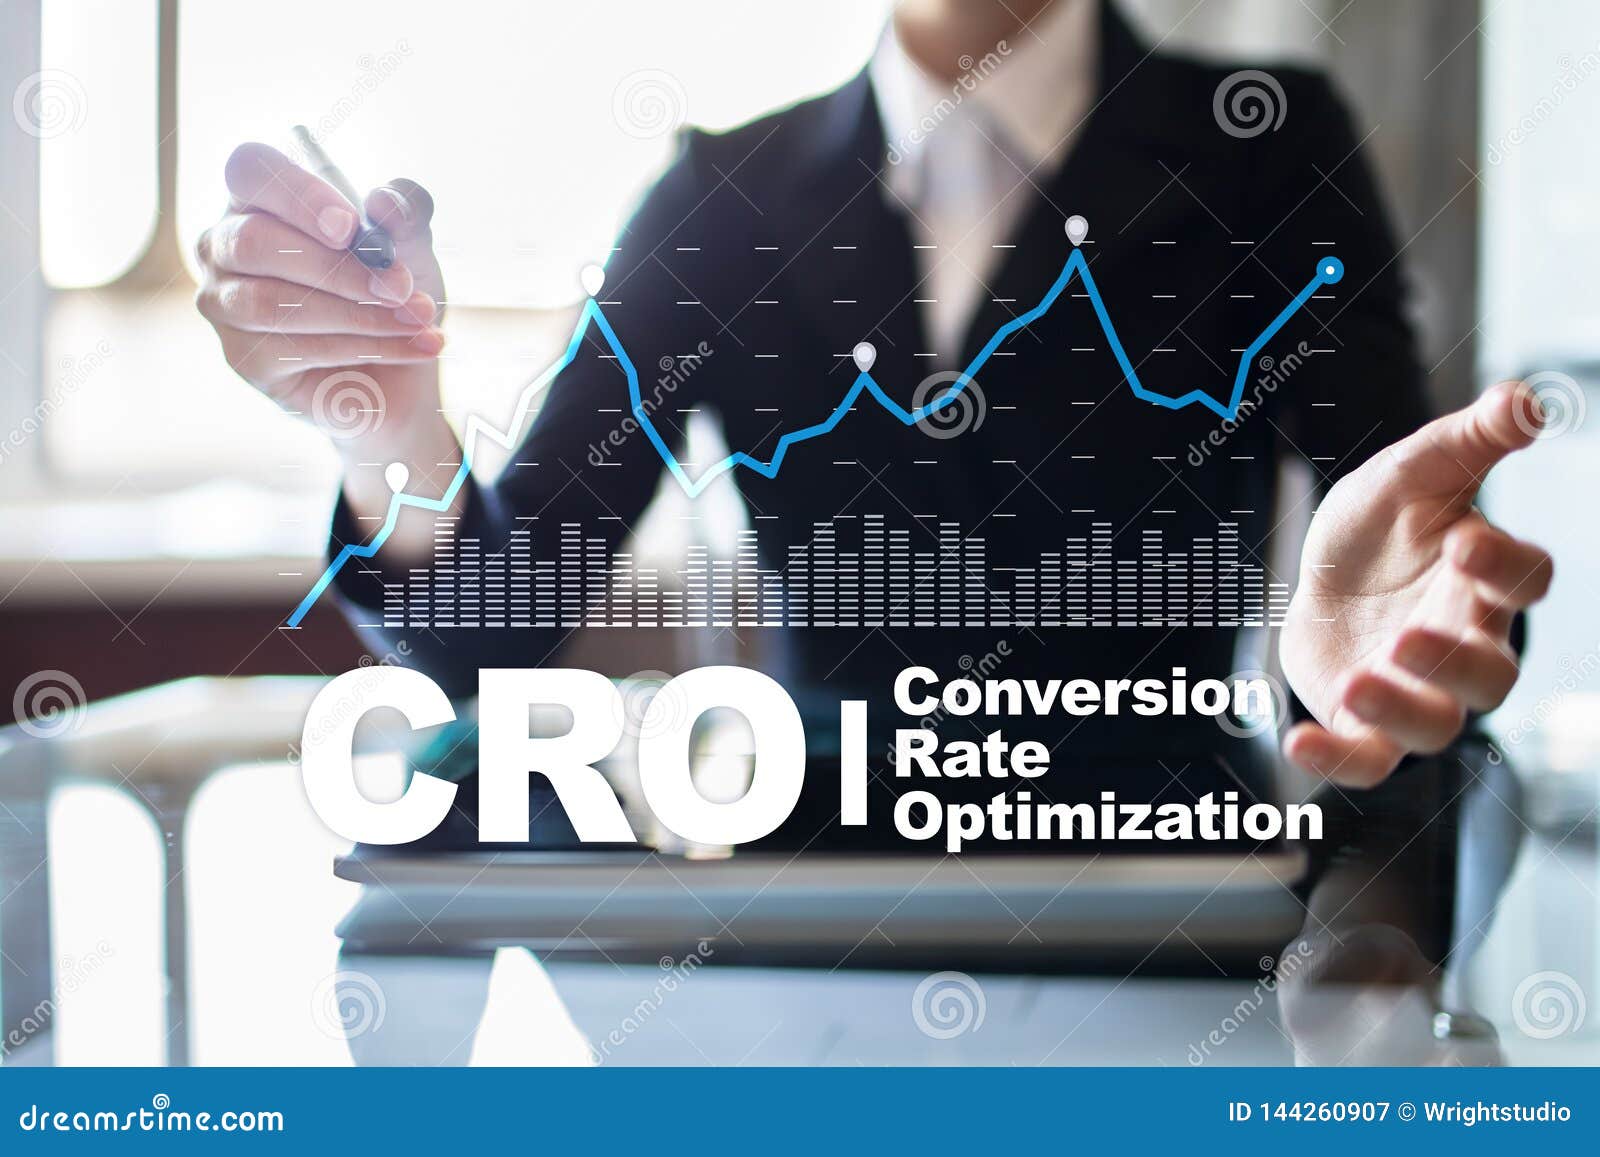 conversion rate optimization, cro concept and lead generation.